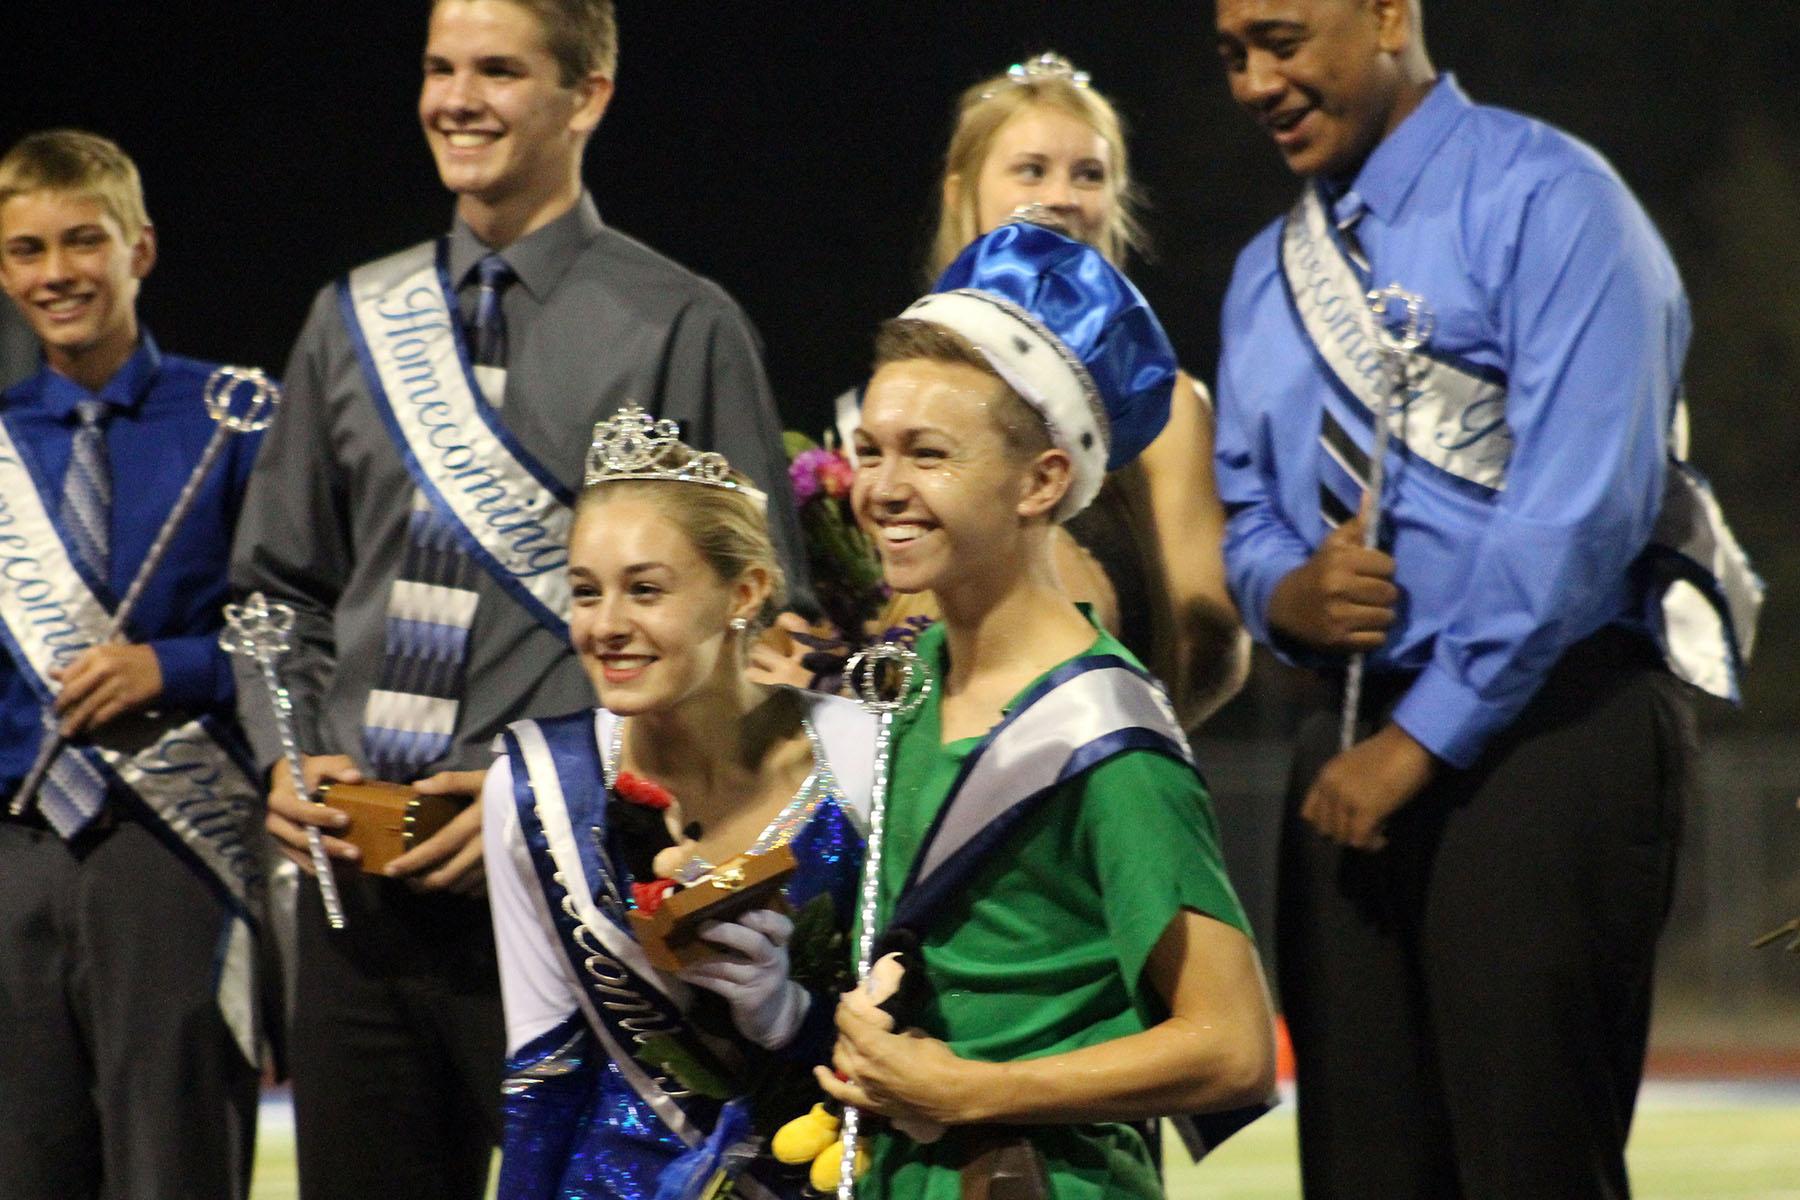 King and Queen of Rocklin